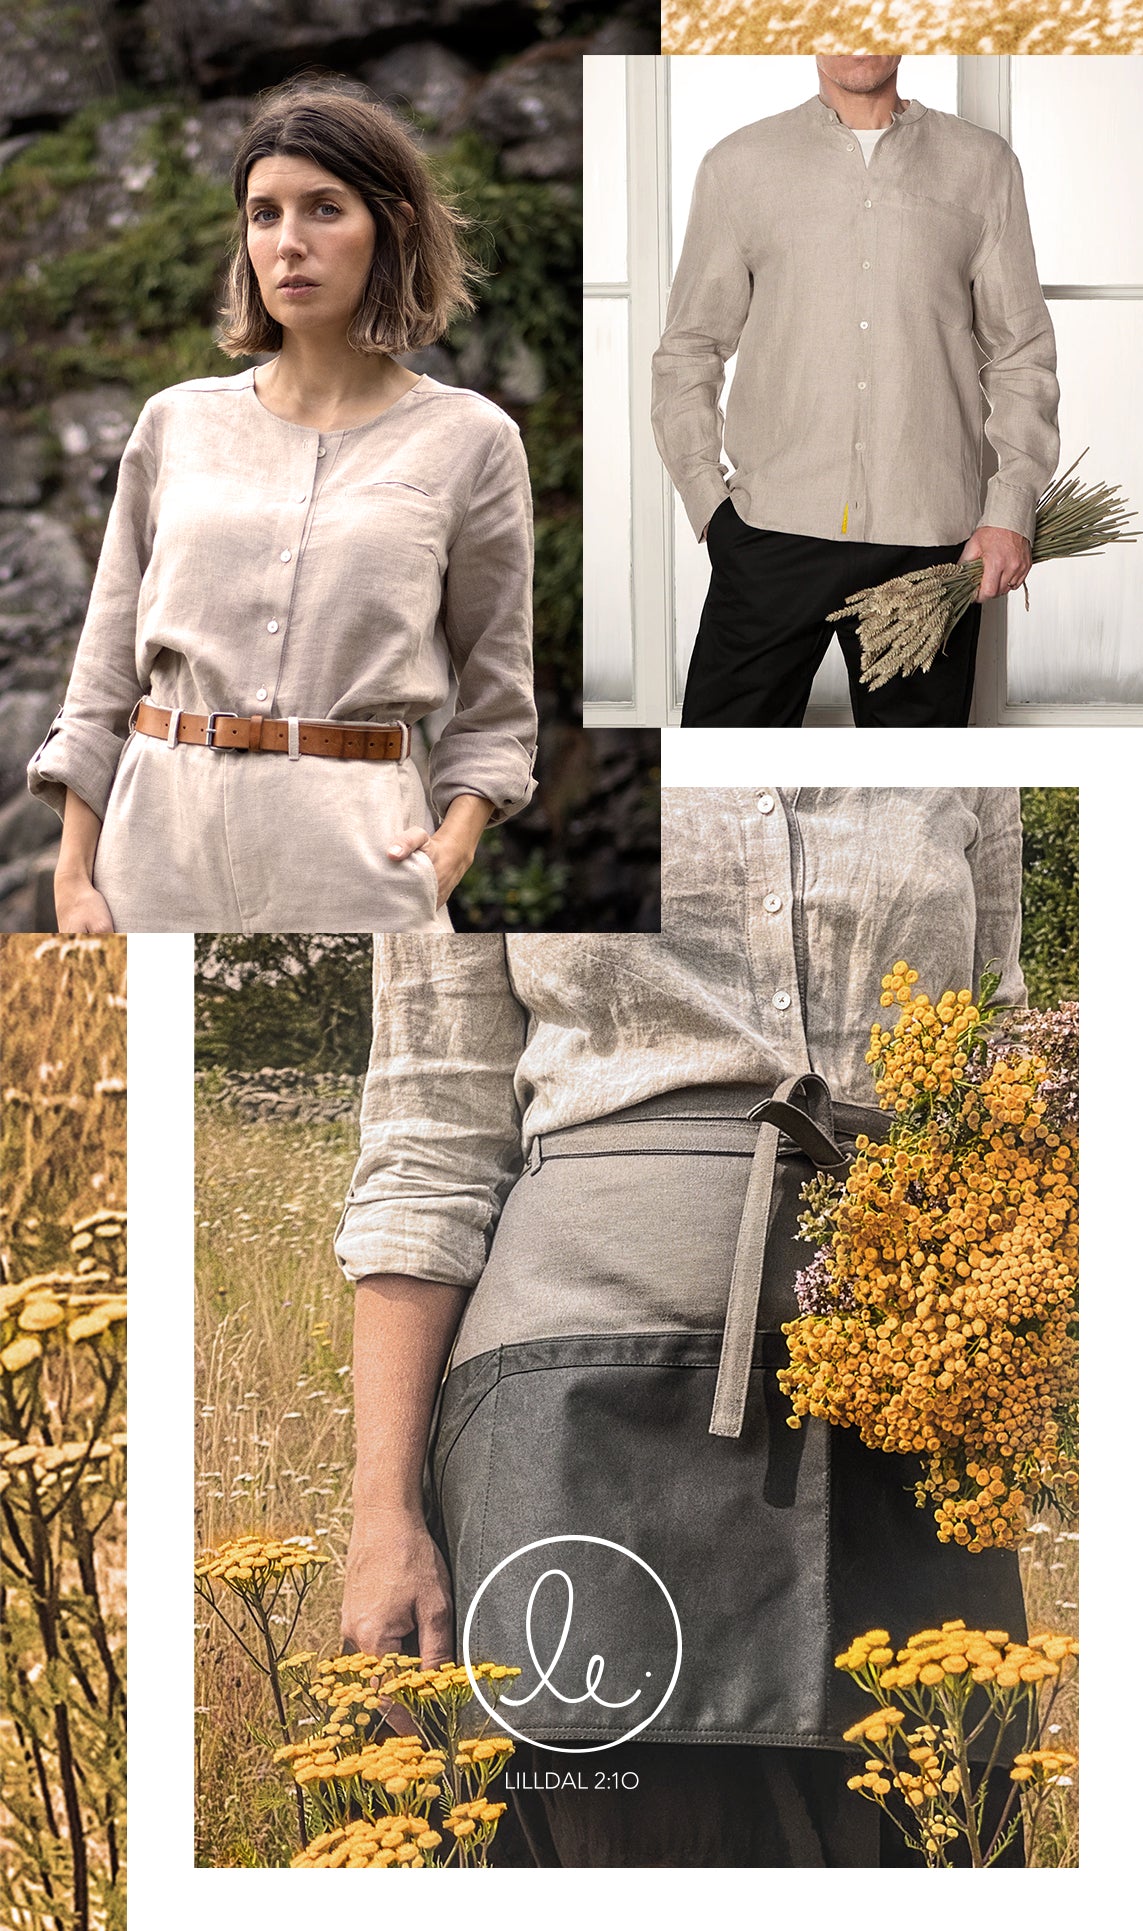 Lilldal 210 September Stories Collage Sustainable Workwear Natural Linen